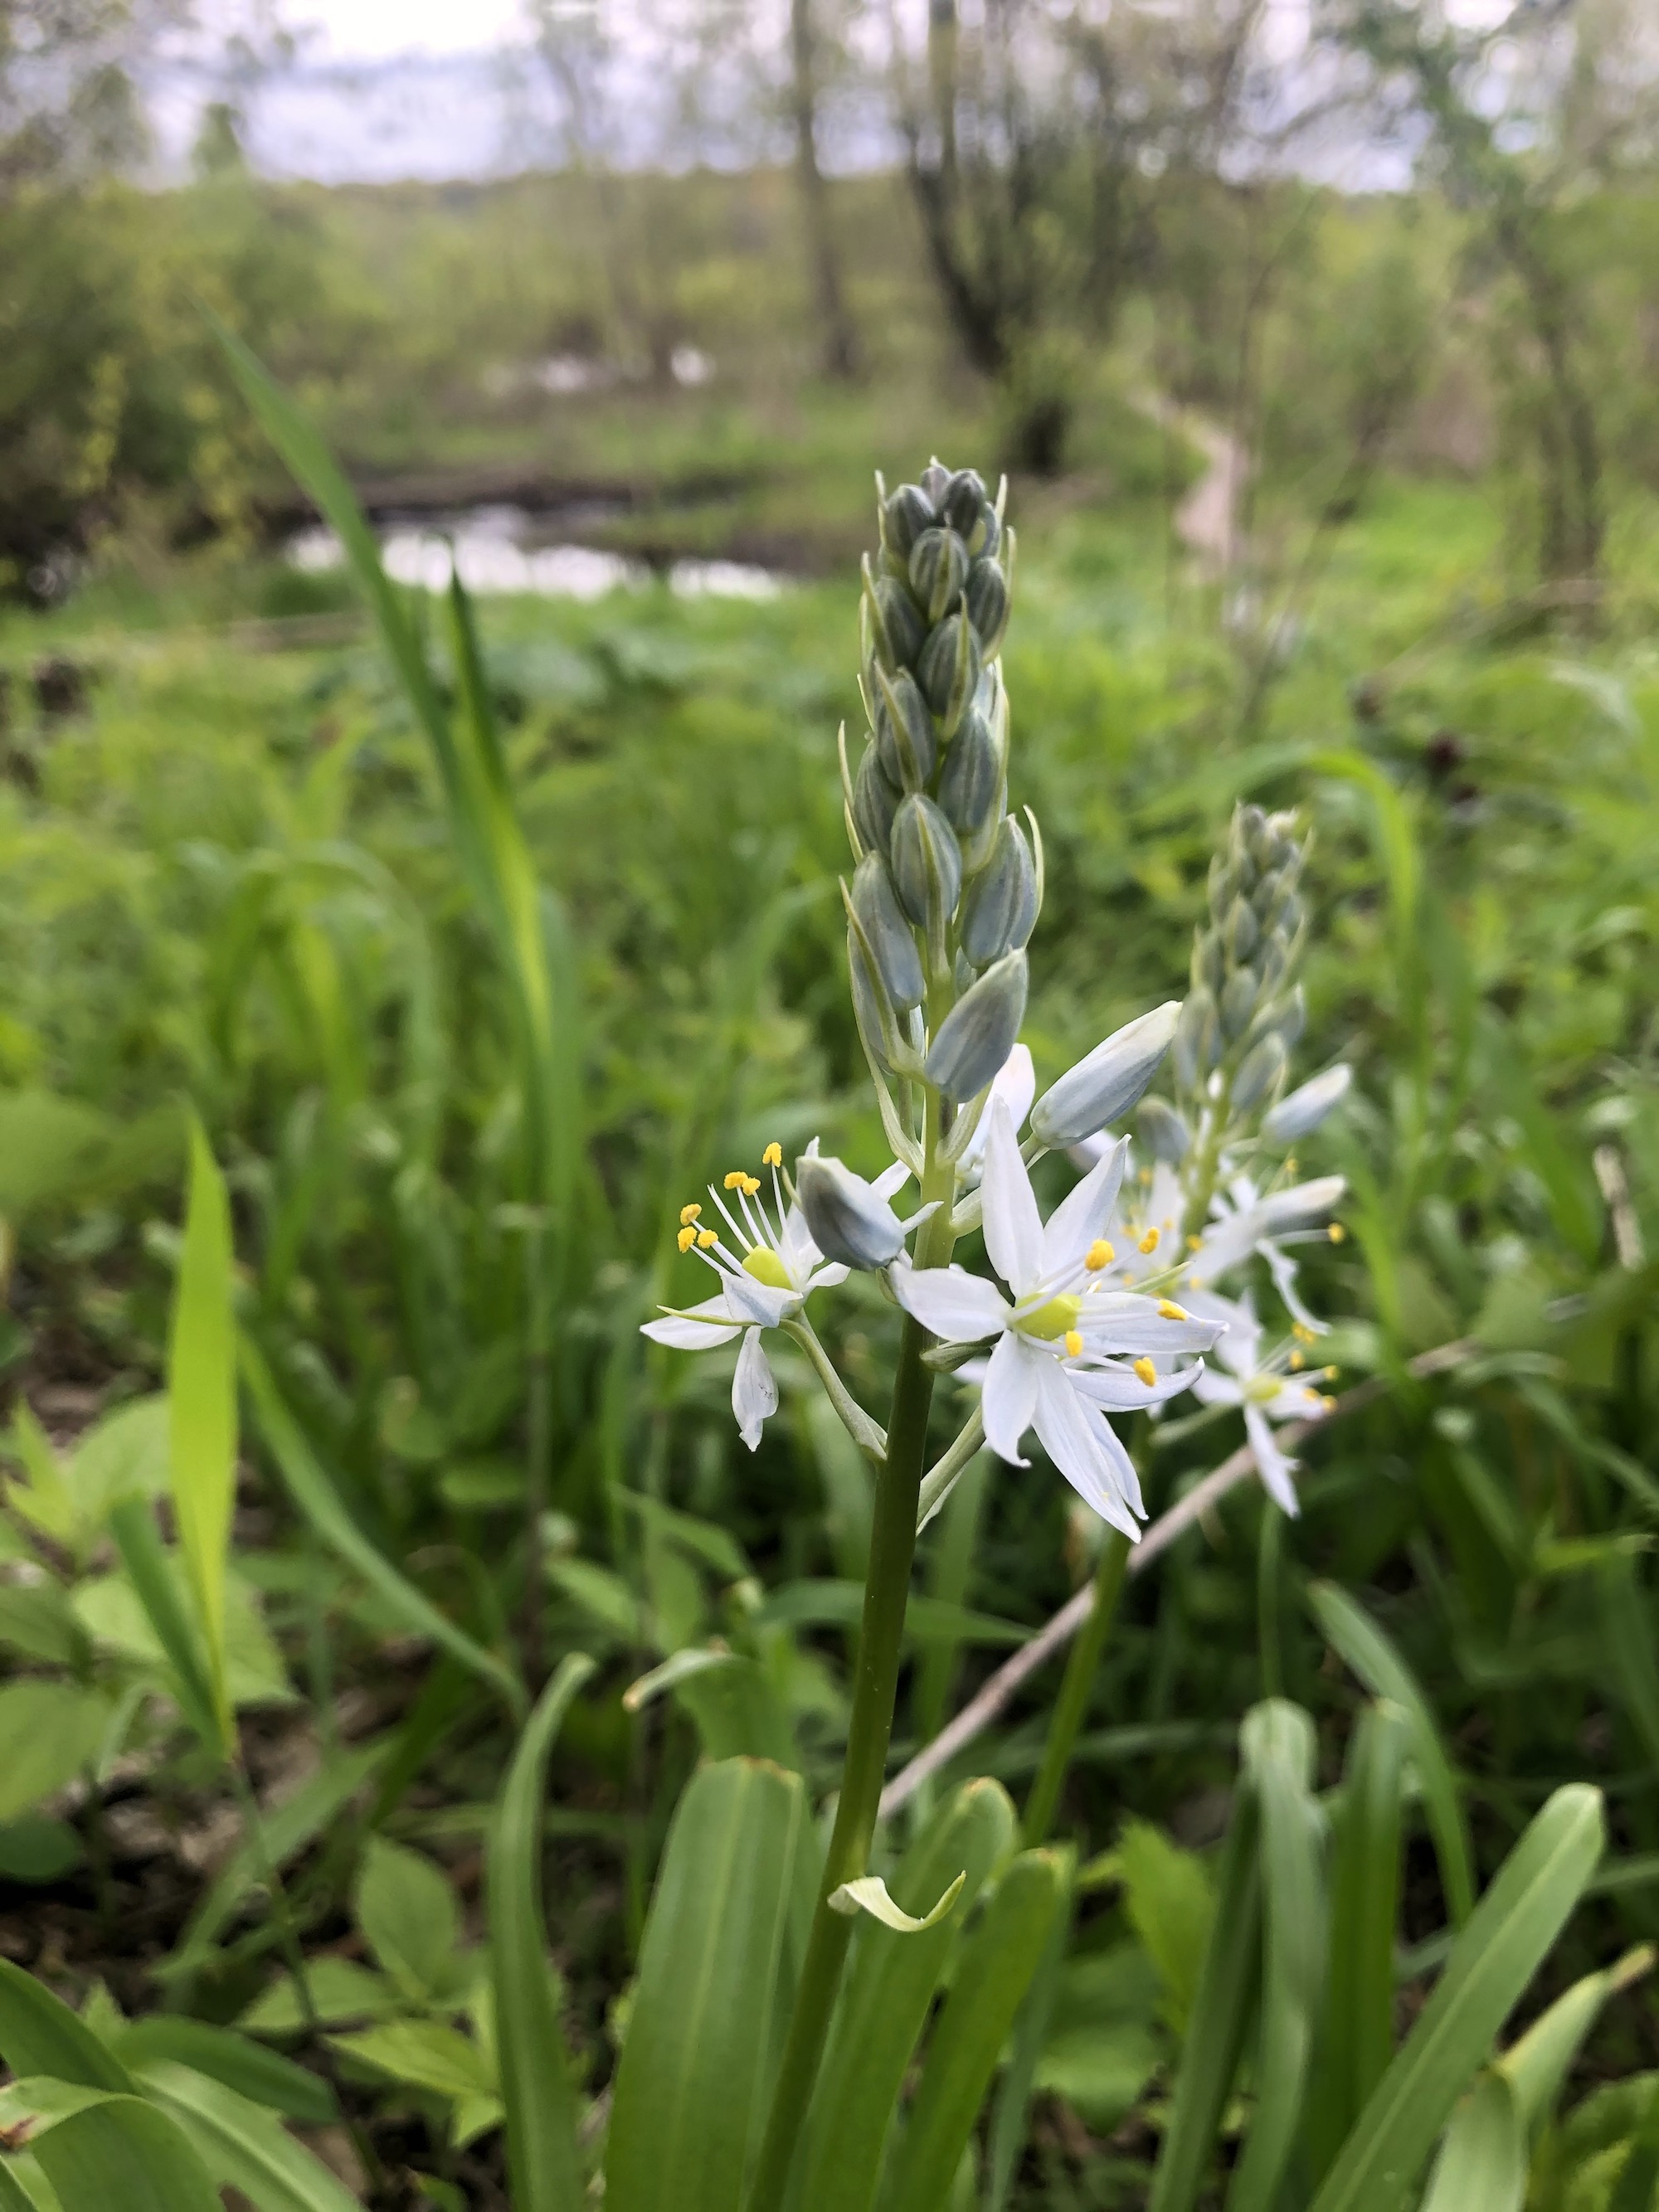 Wild Hyacinth by Council Ring in Oak Savanna on May 10, 2021.